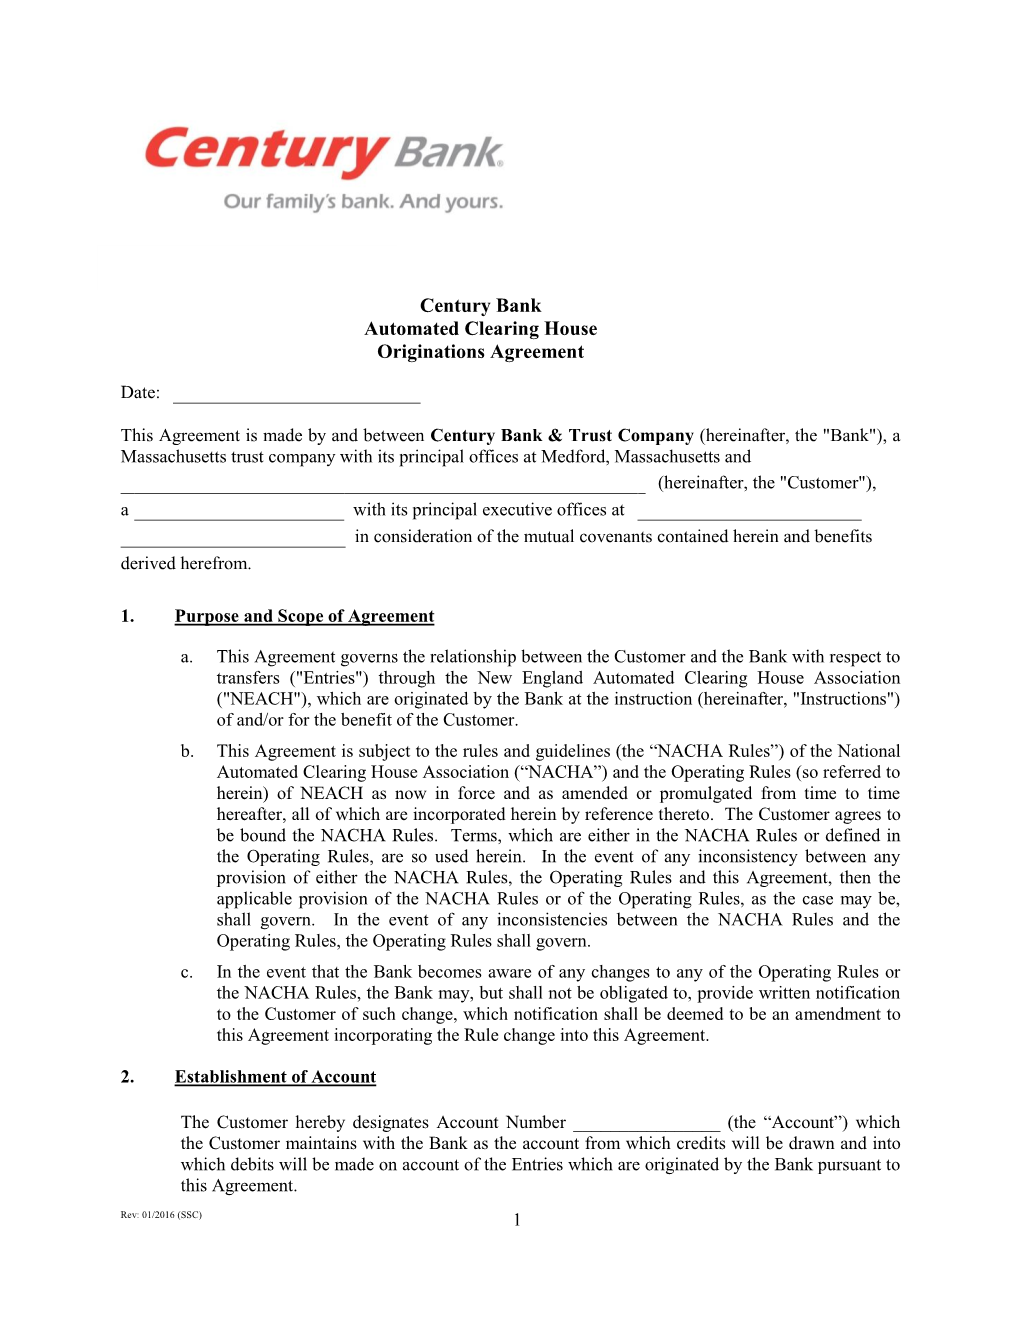 Century Bank Automated Clearing House Originations Agreement